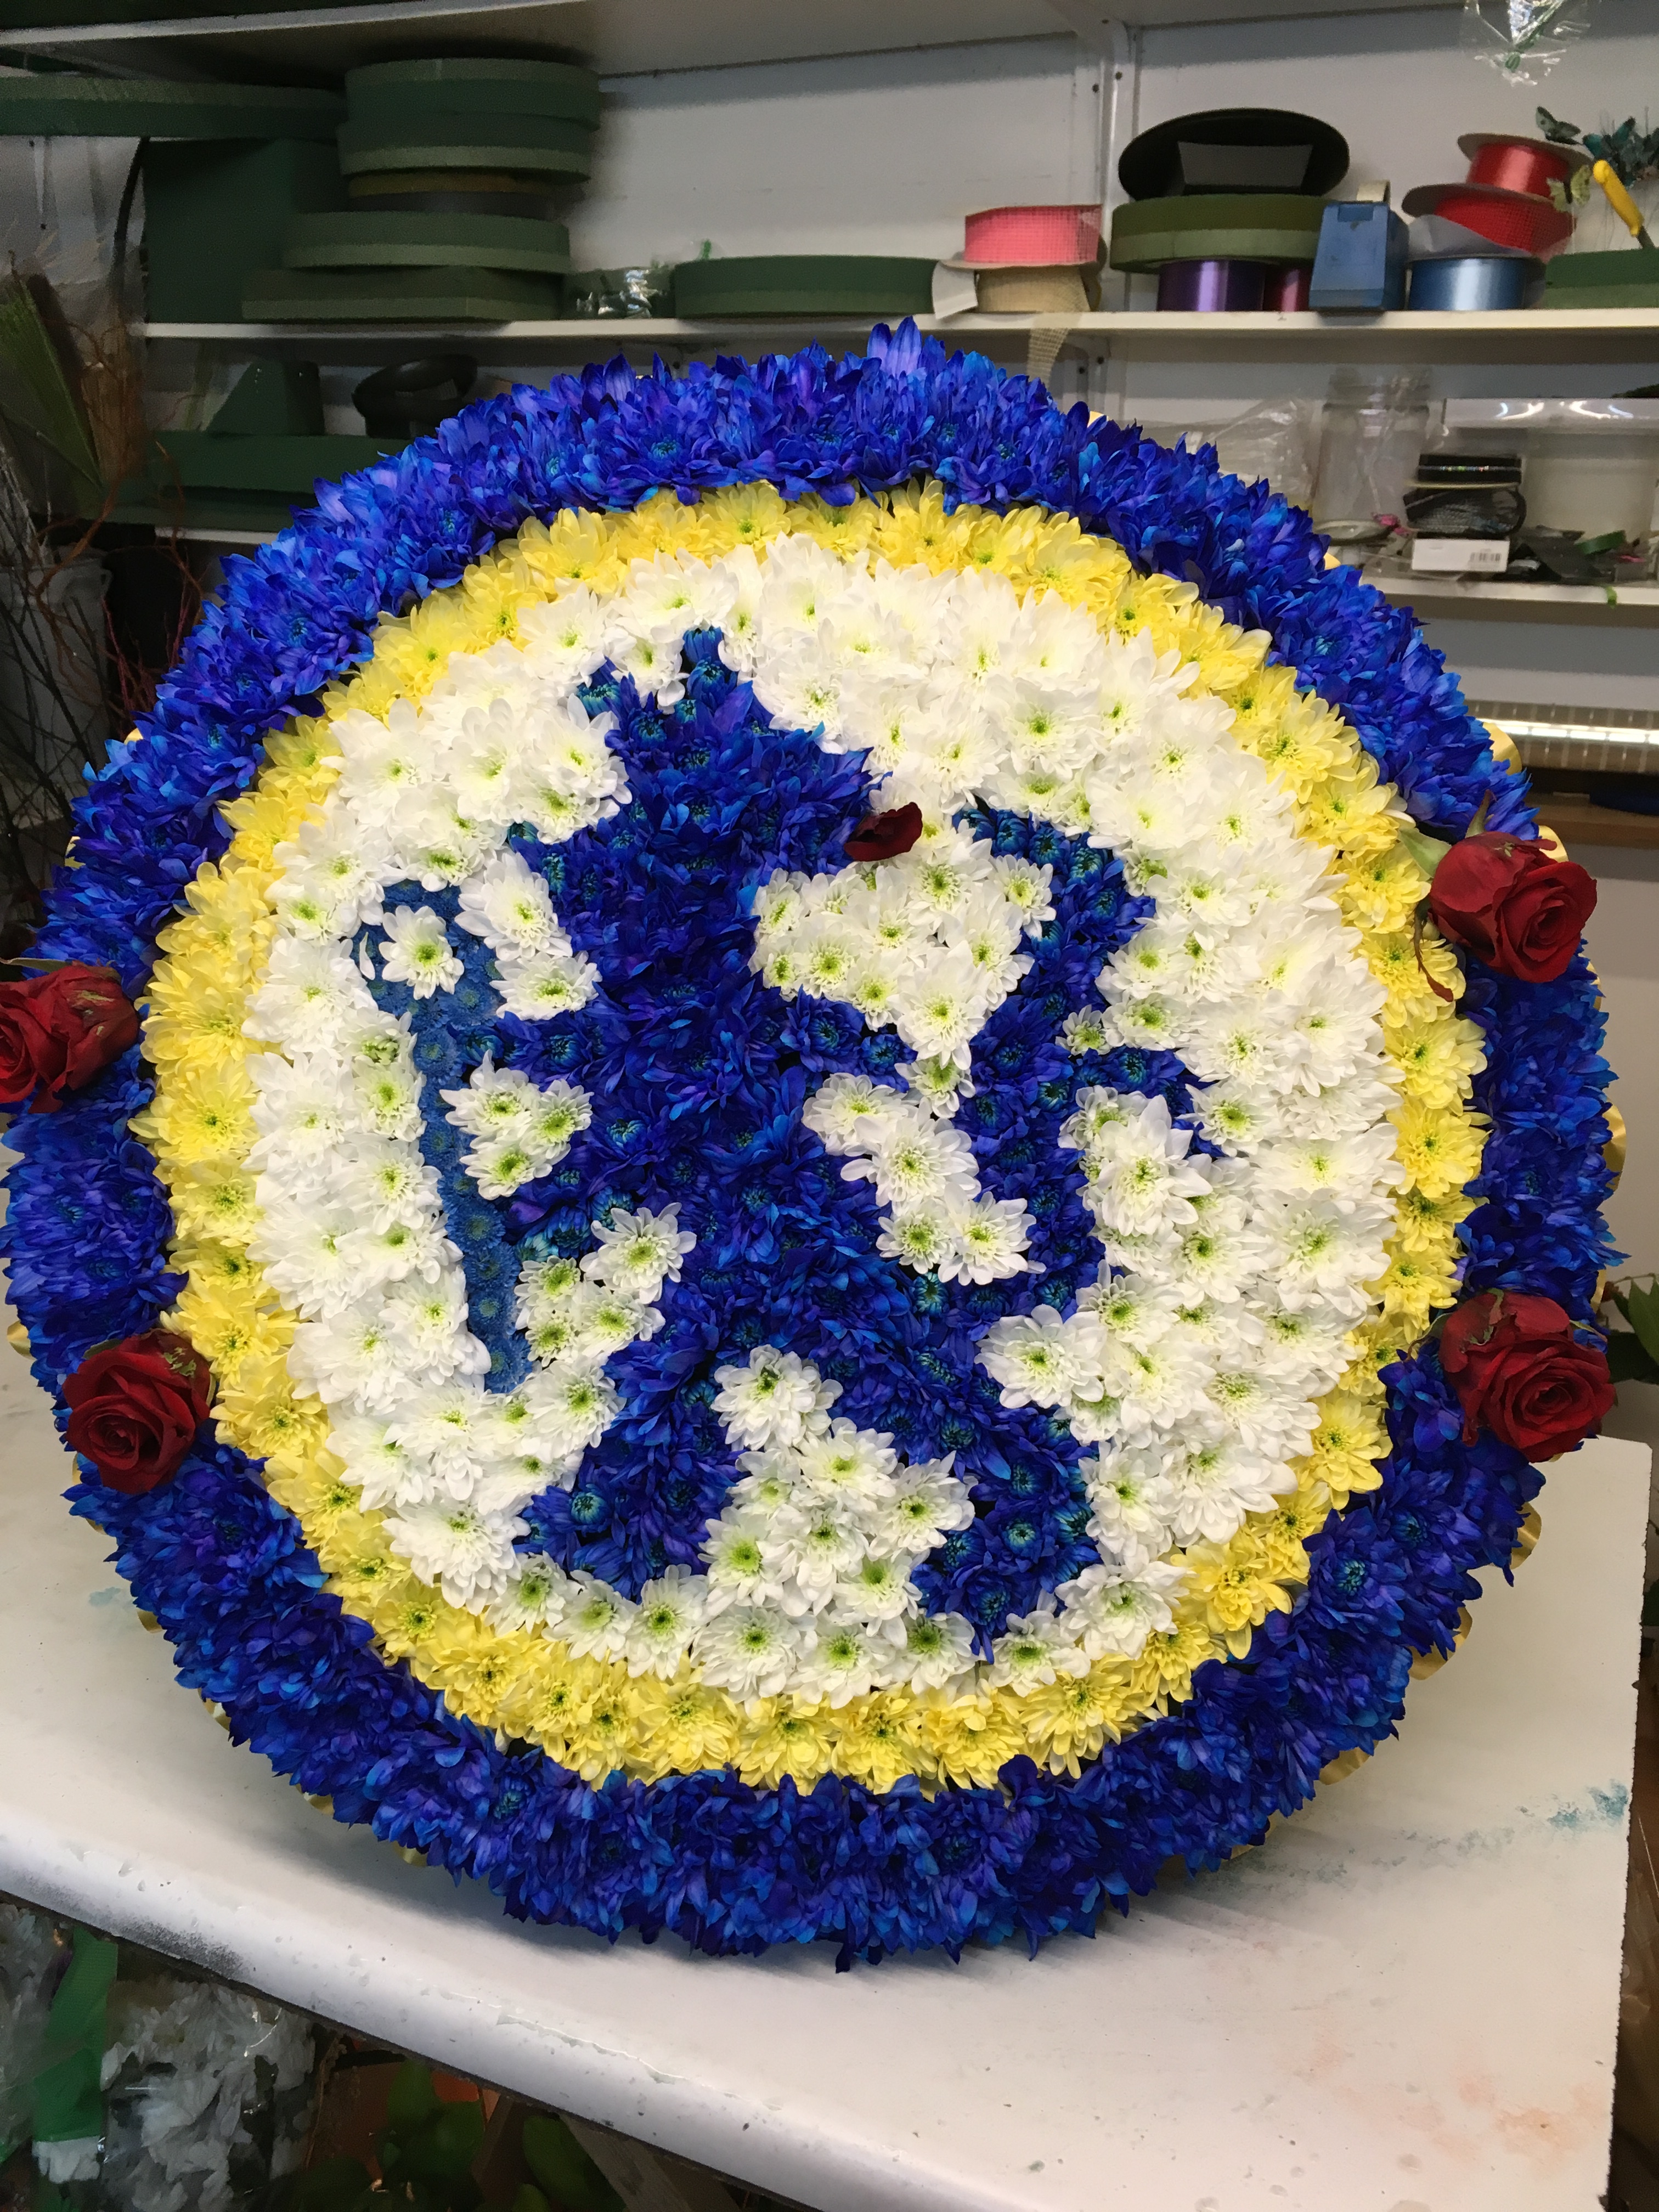 Chelsea shield made from flowers